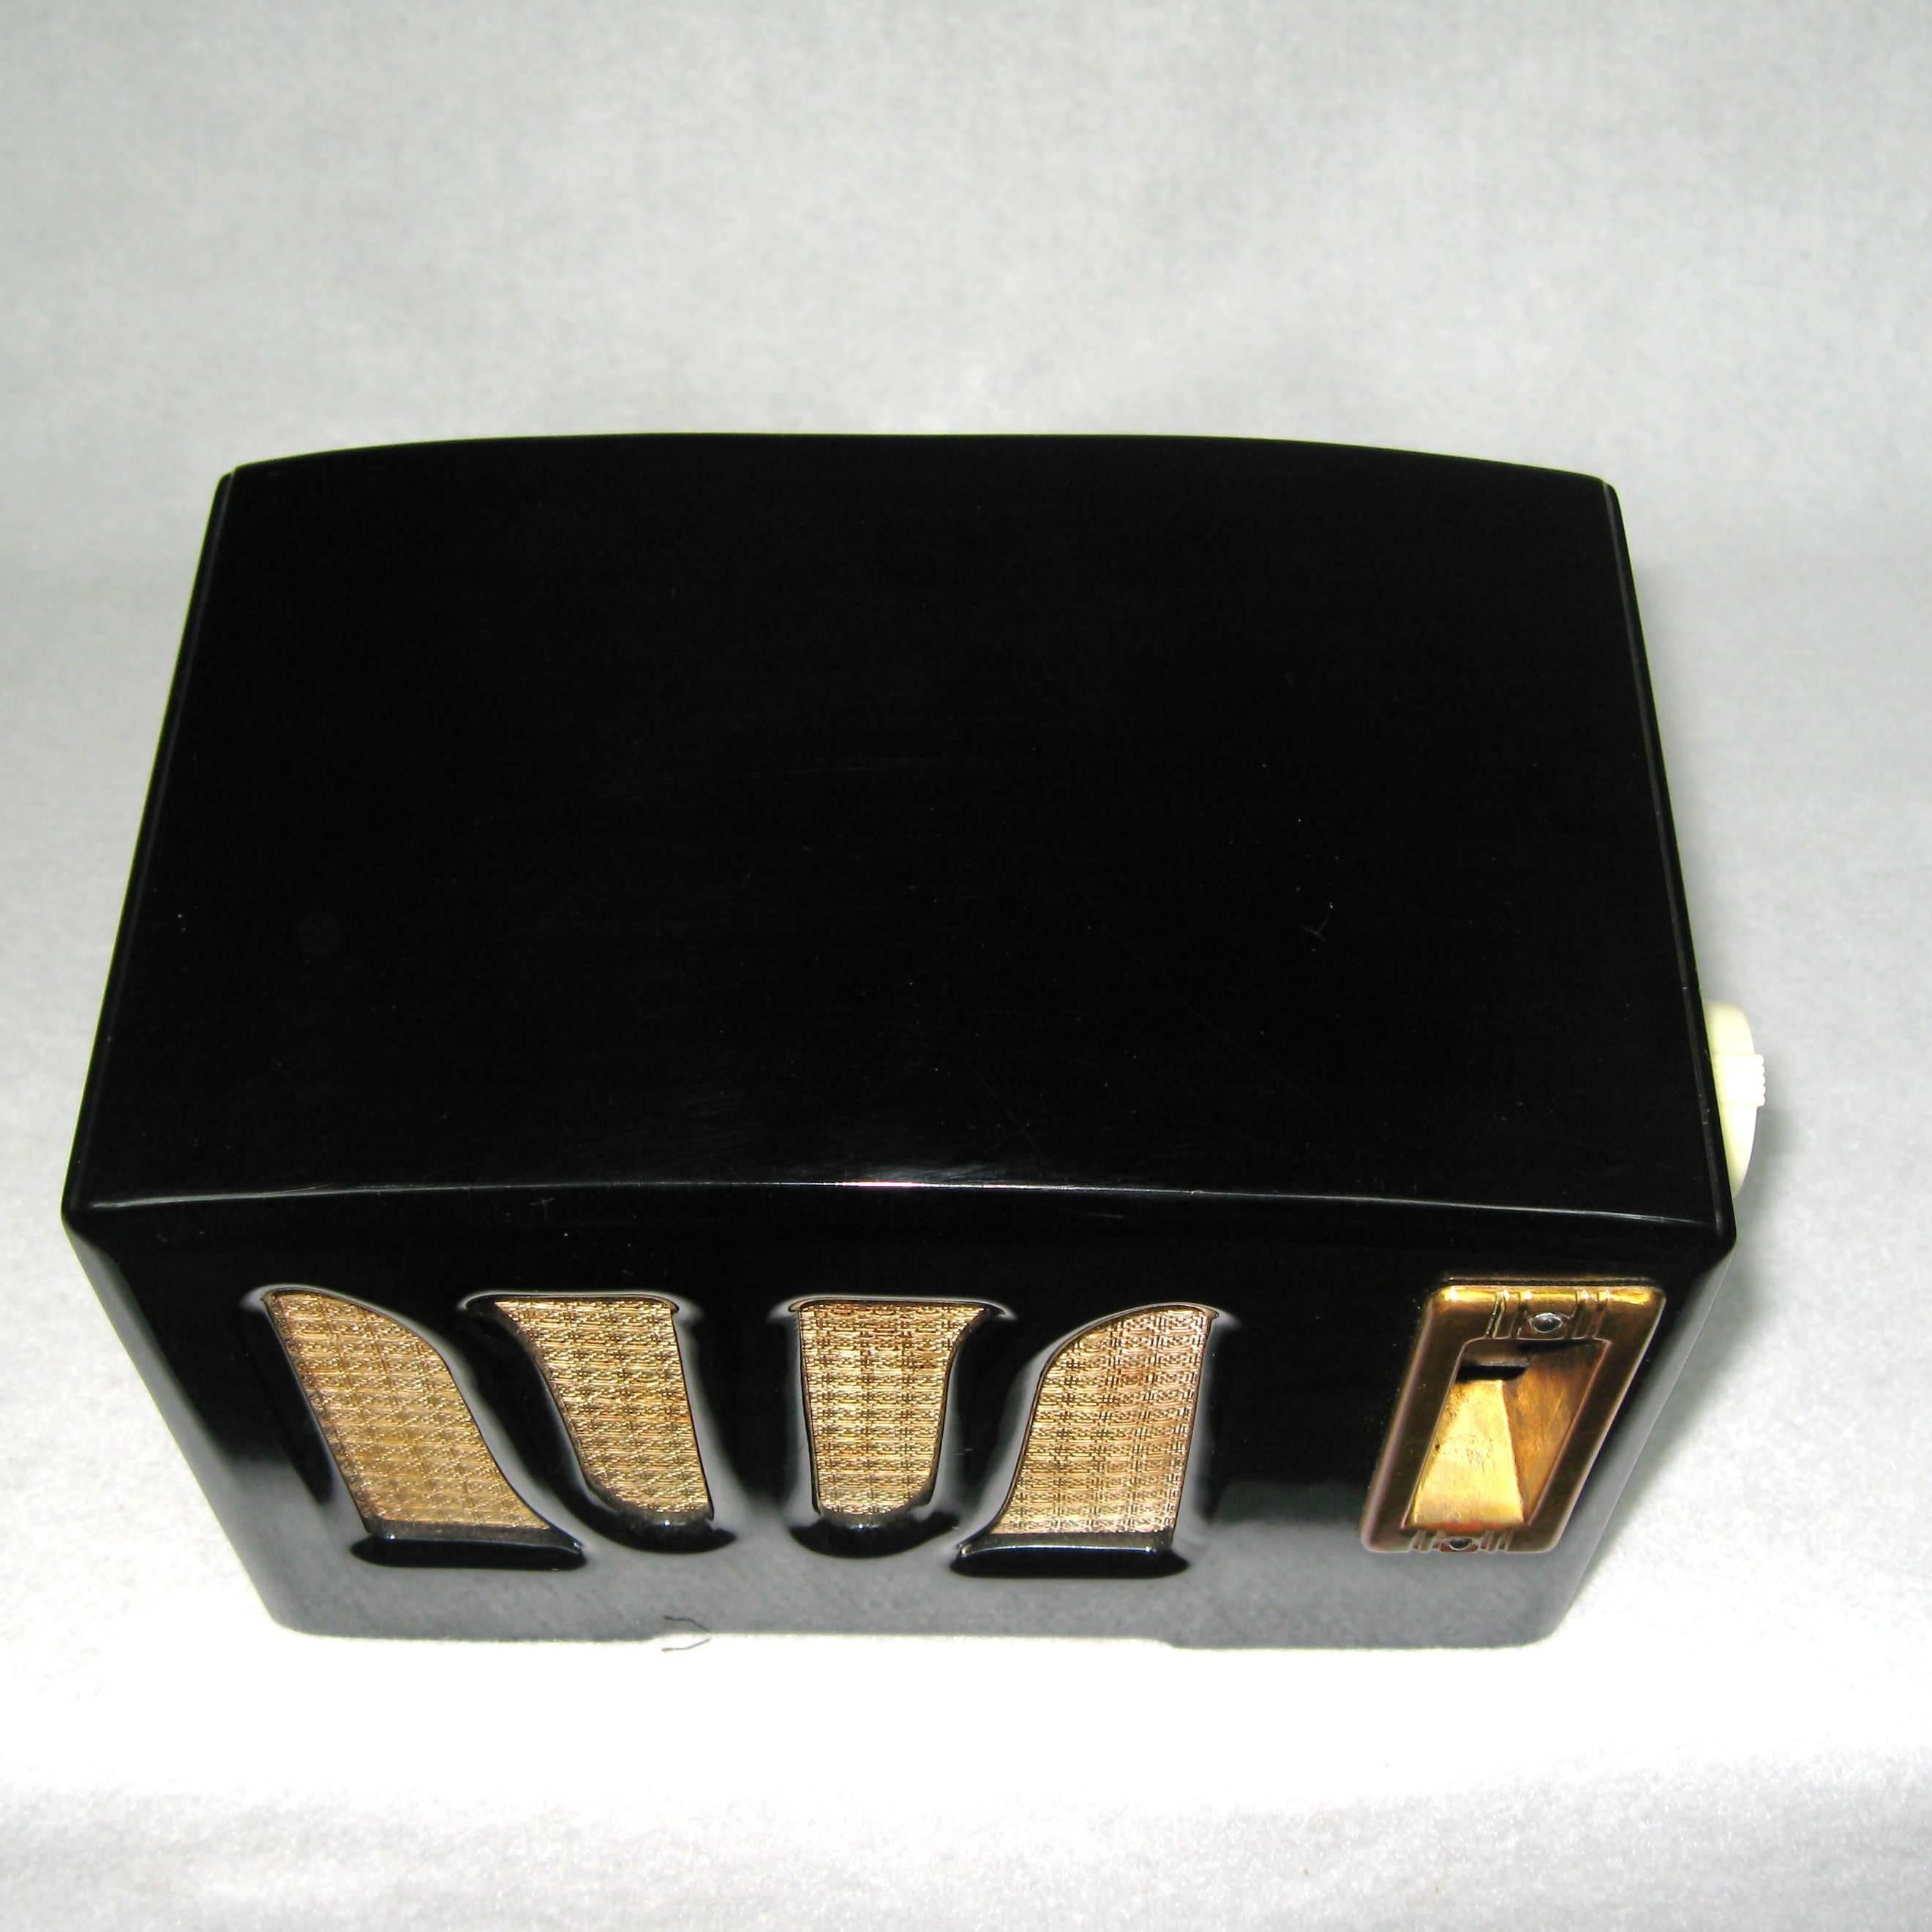 This is an original 1930s black with white Knobs RCA RC-350 